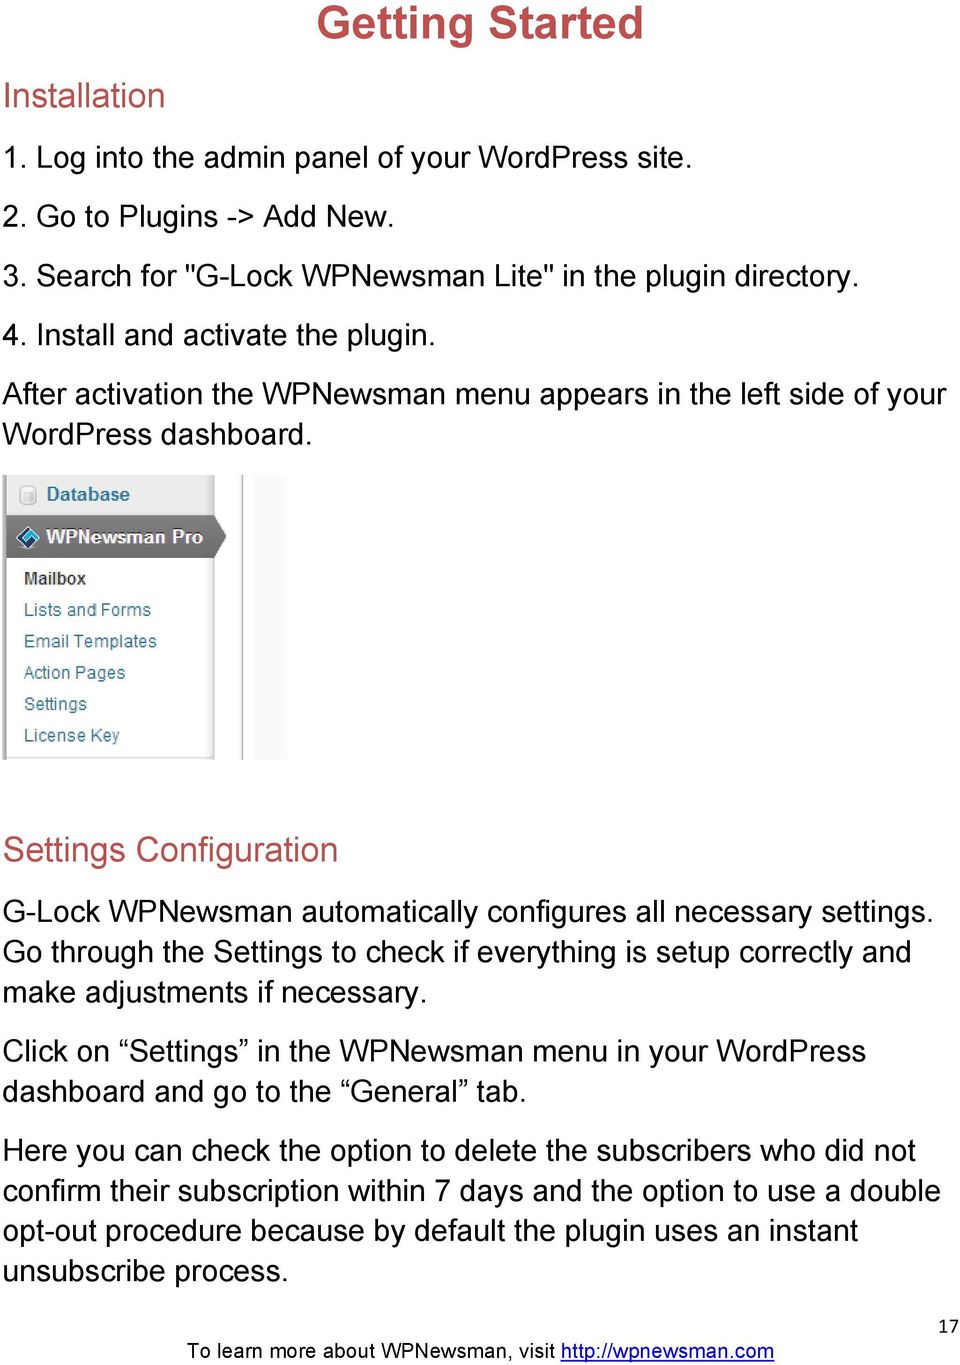 Settings Configuration G-Lock WPNewsman automatically configures all necessary settings. Go through the Settings to check if everything is setup correctly and make adjustments if necessary.